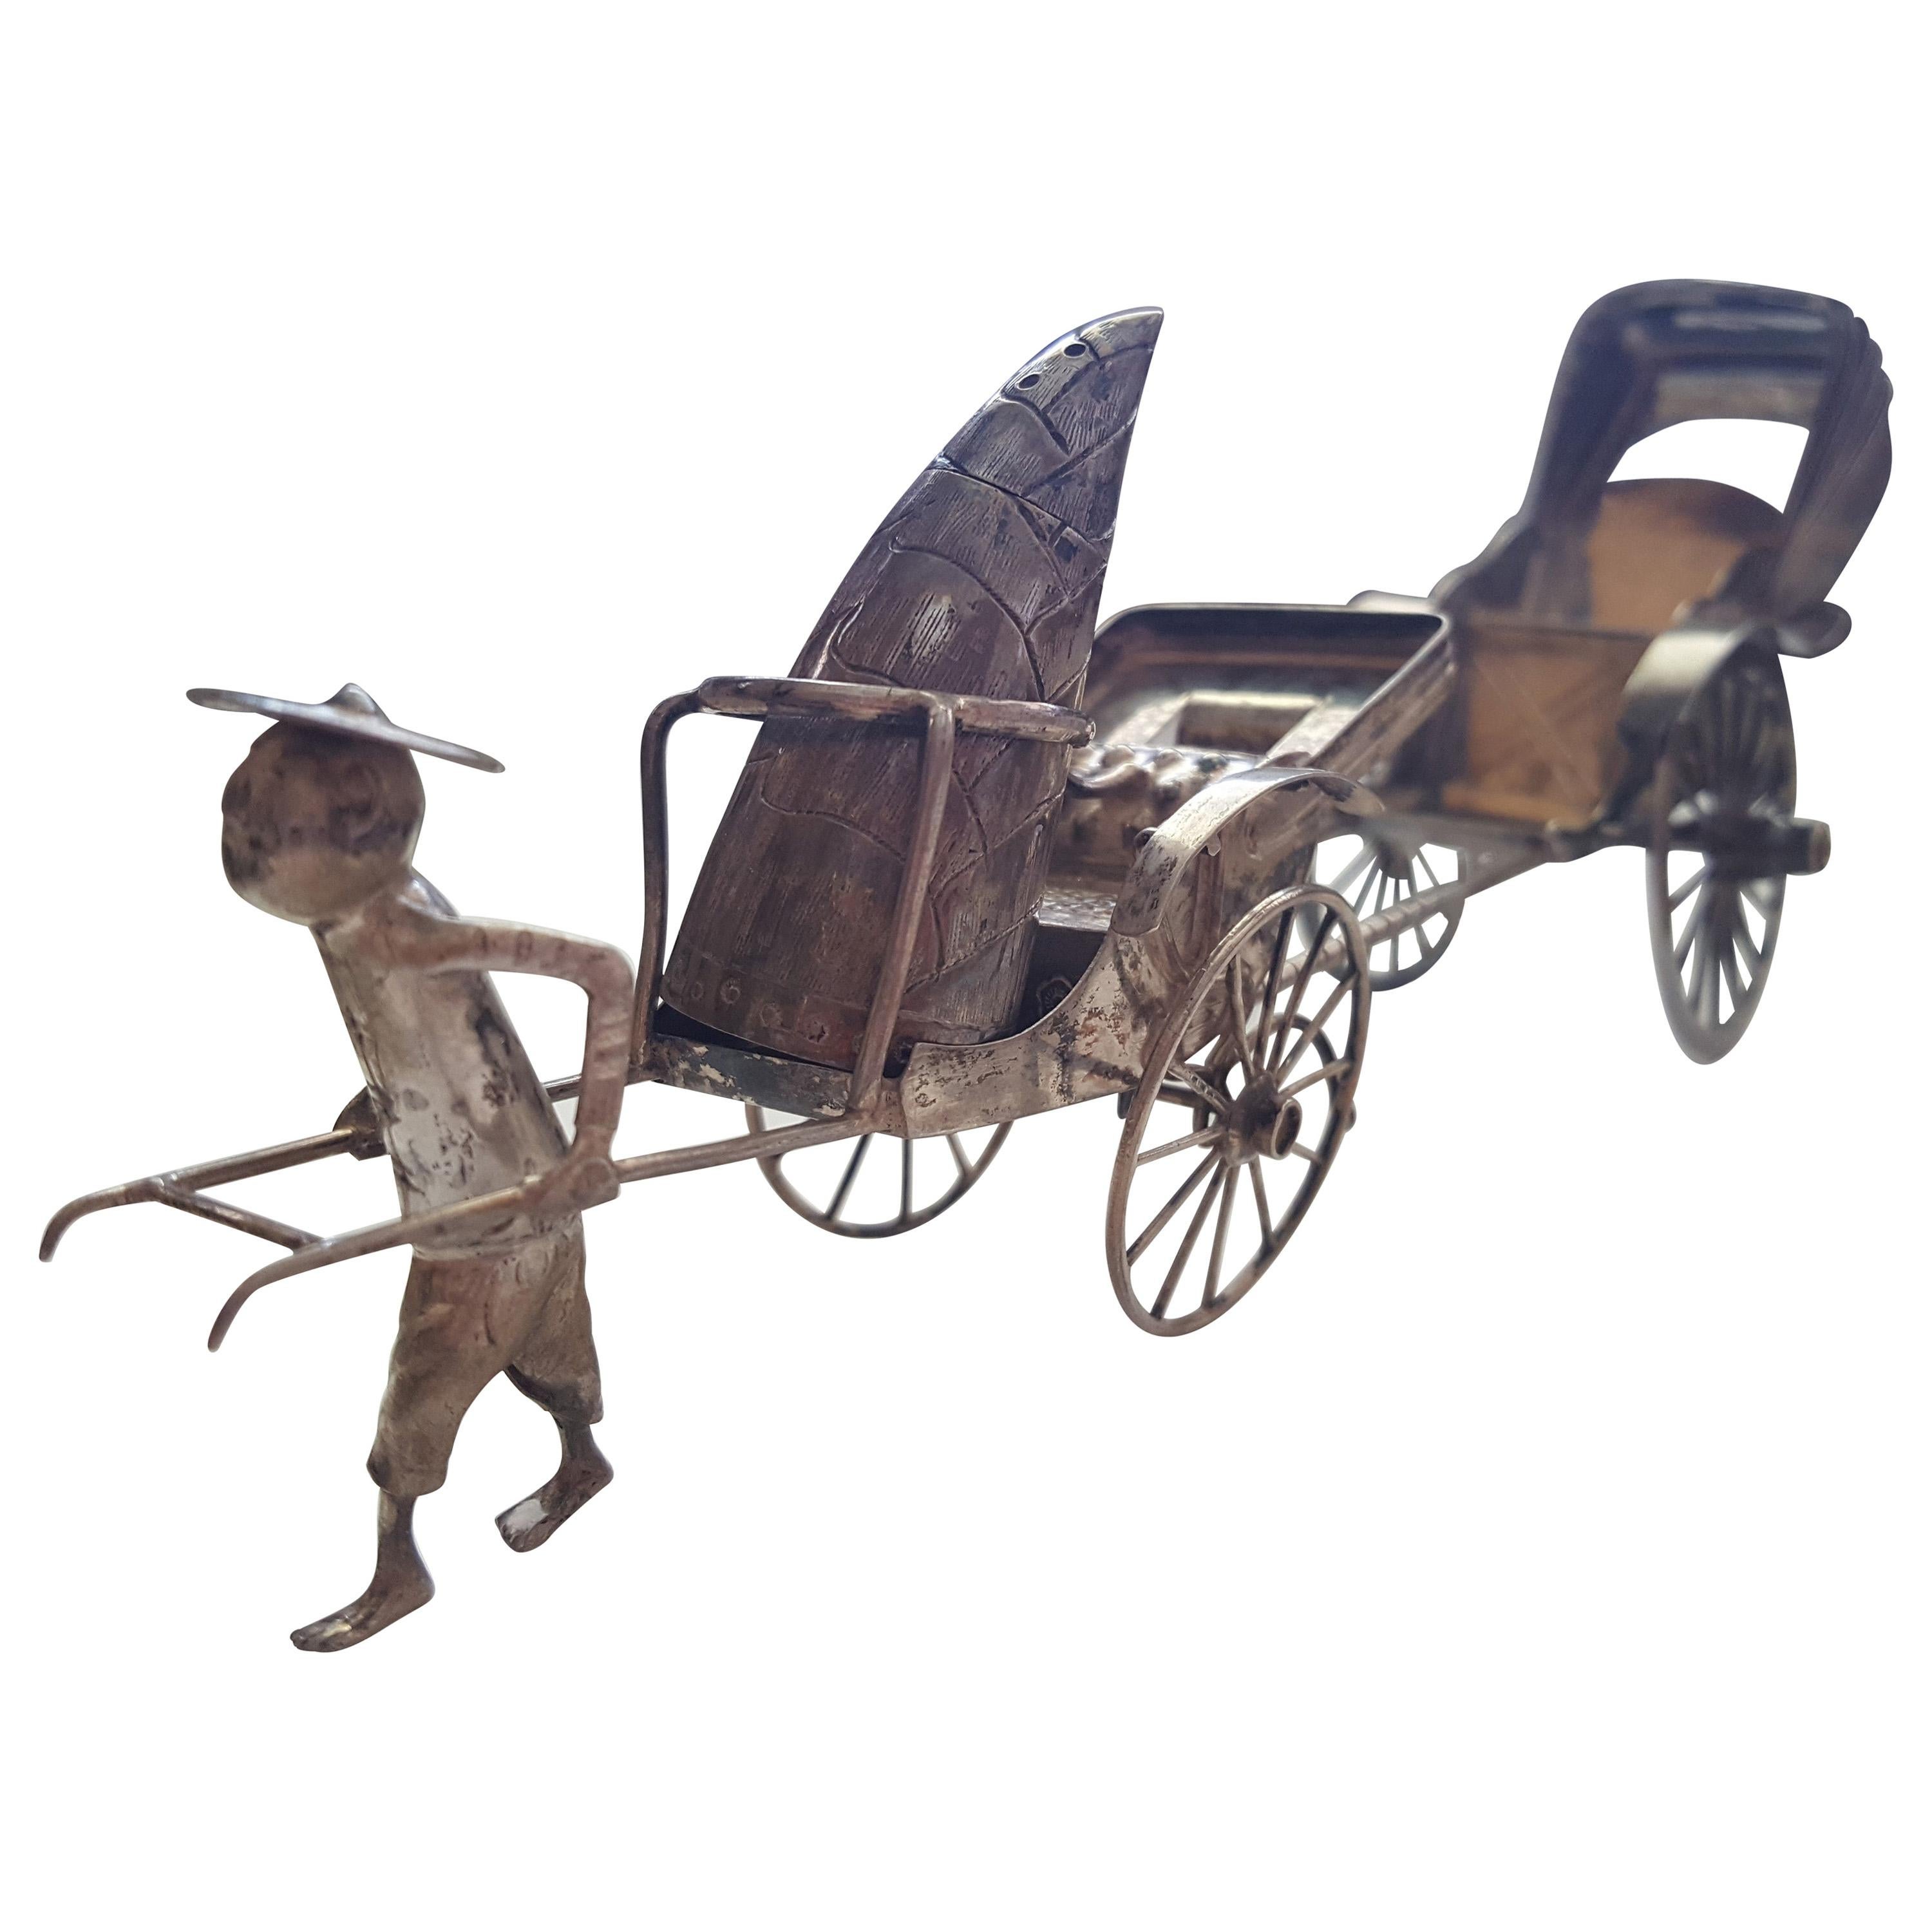 Vintage Silver Salt and Pepper Shaker, Asian, Two Rickshaw Carts Pulled by Man